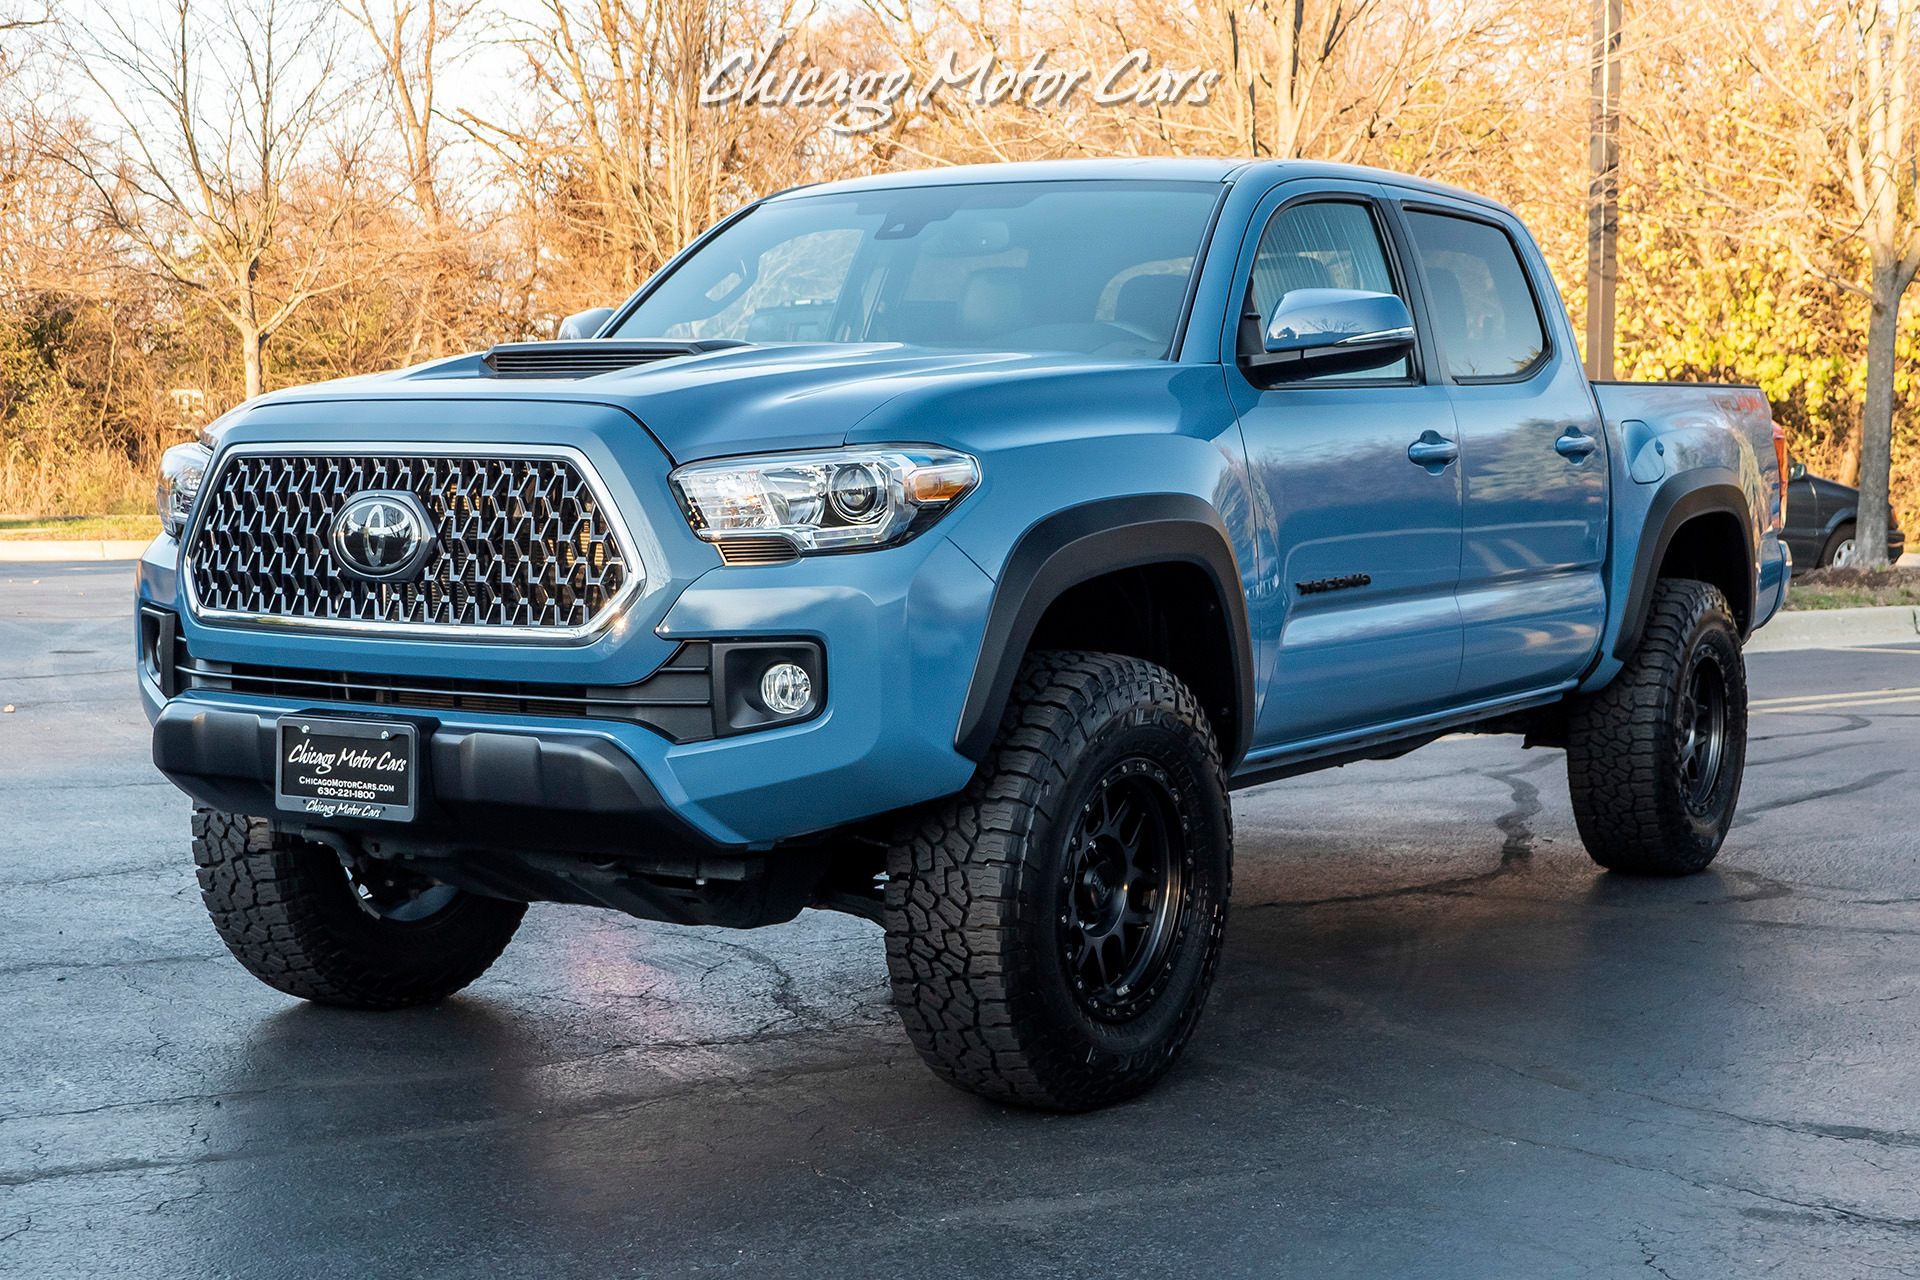 Used 2019 Toyota Tacoma TRD Off-Road 4x4 Lifted with Upgraded Tires